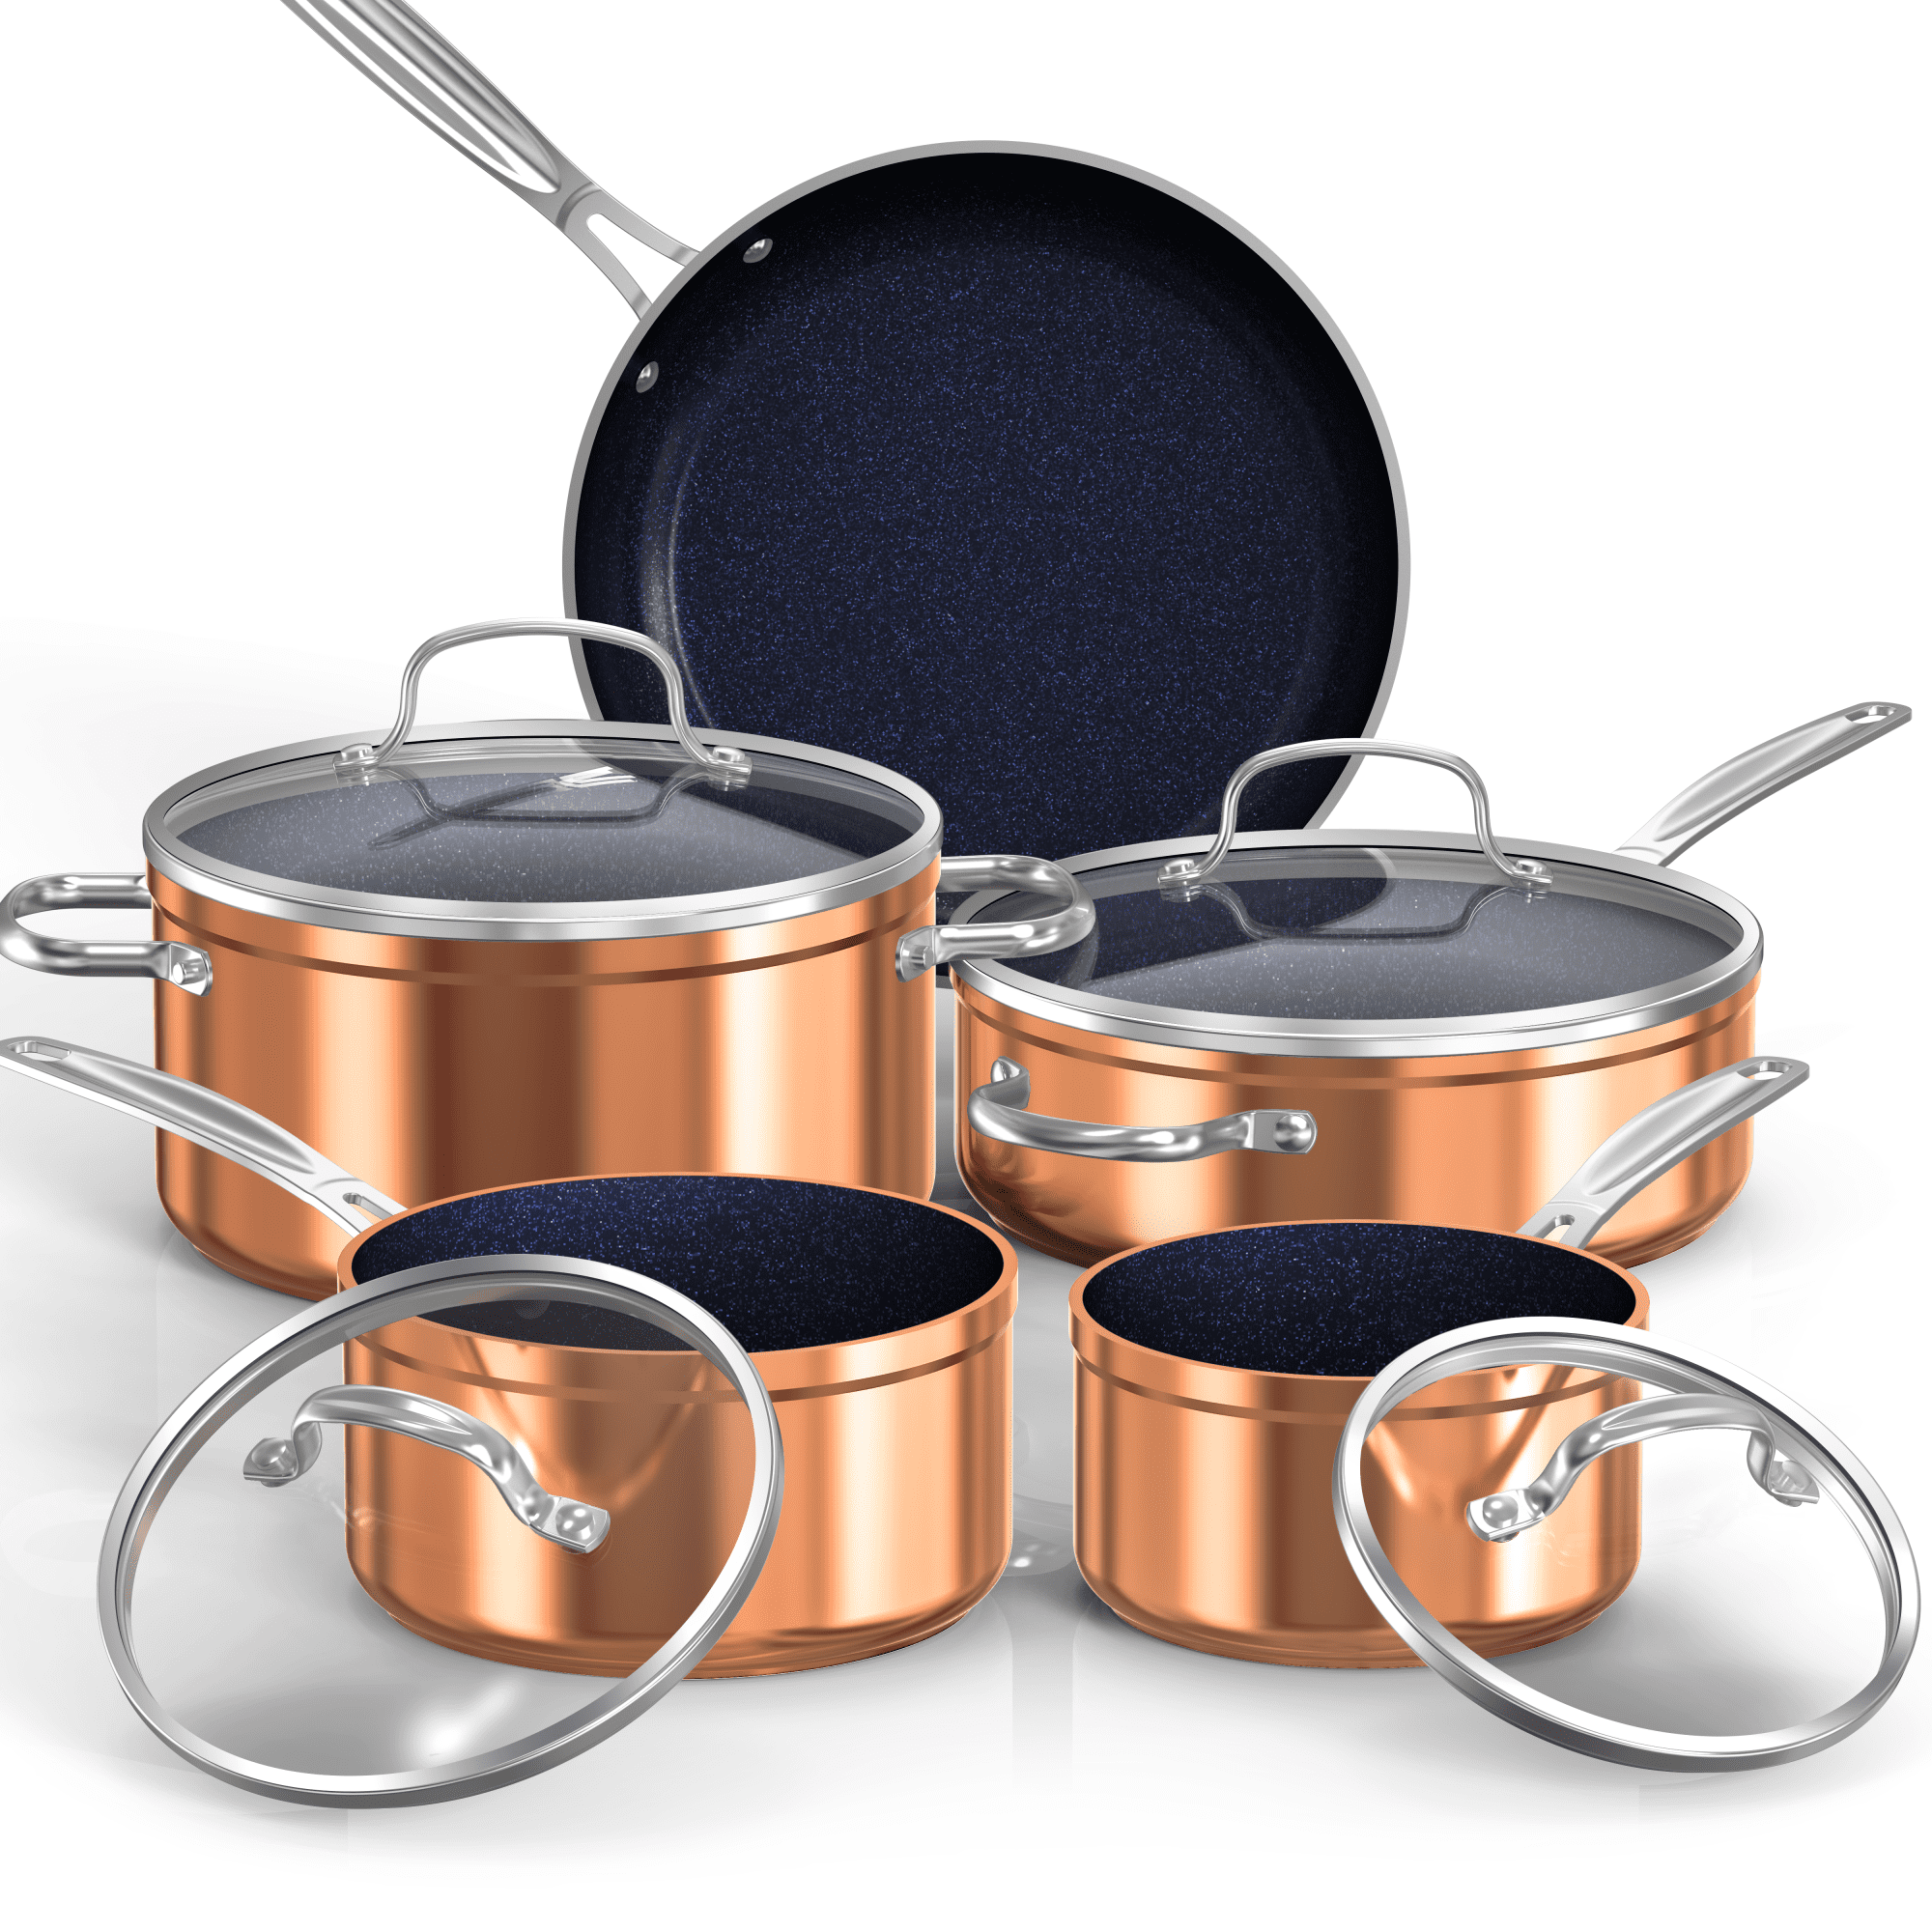 Clockitchen 6-piece Non-stick Cookware Set Pots and Pans Set for Cooking -  Ceramic Coating Saucepan, Stock Pot with Lid, Frying Pan, Copper